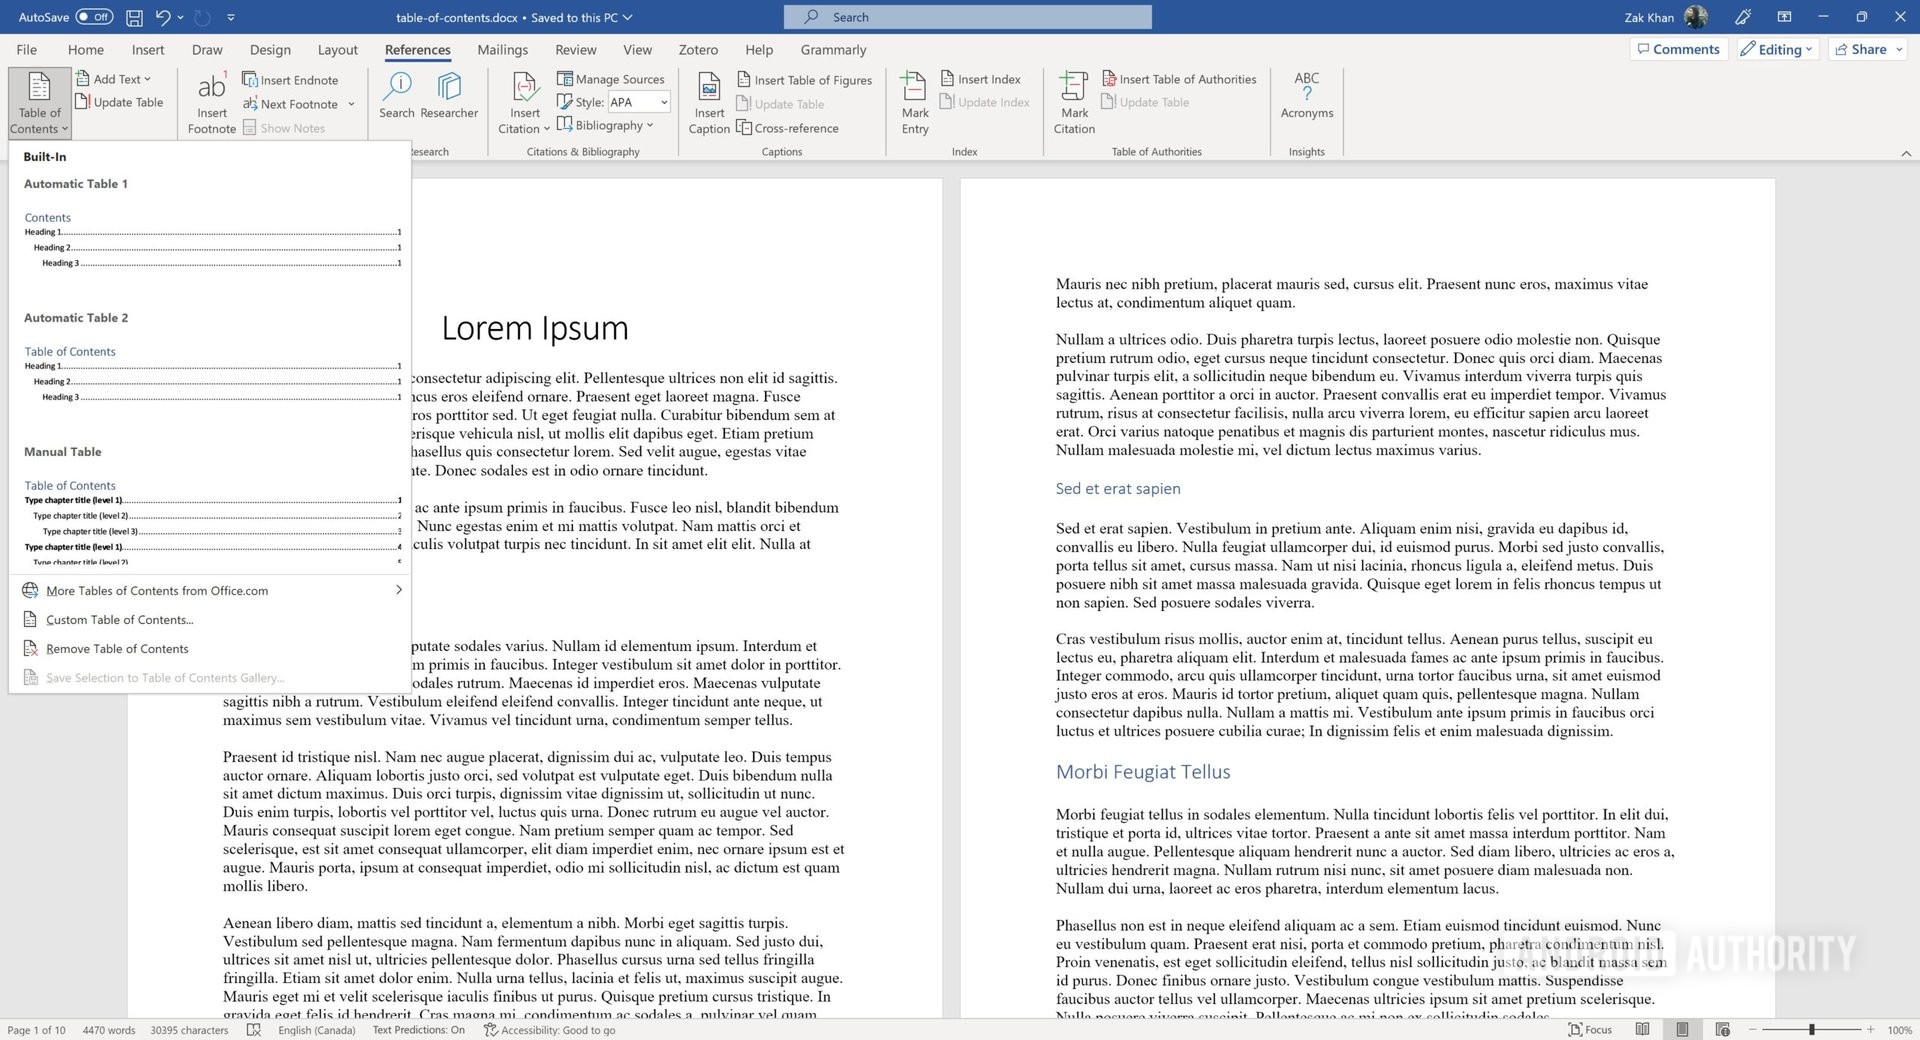 A screenshot of Microsoft Word showing the drop menu to insert a table of contents.